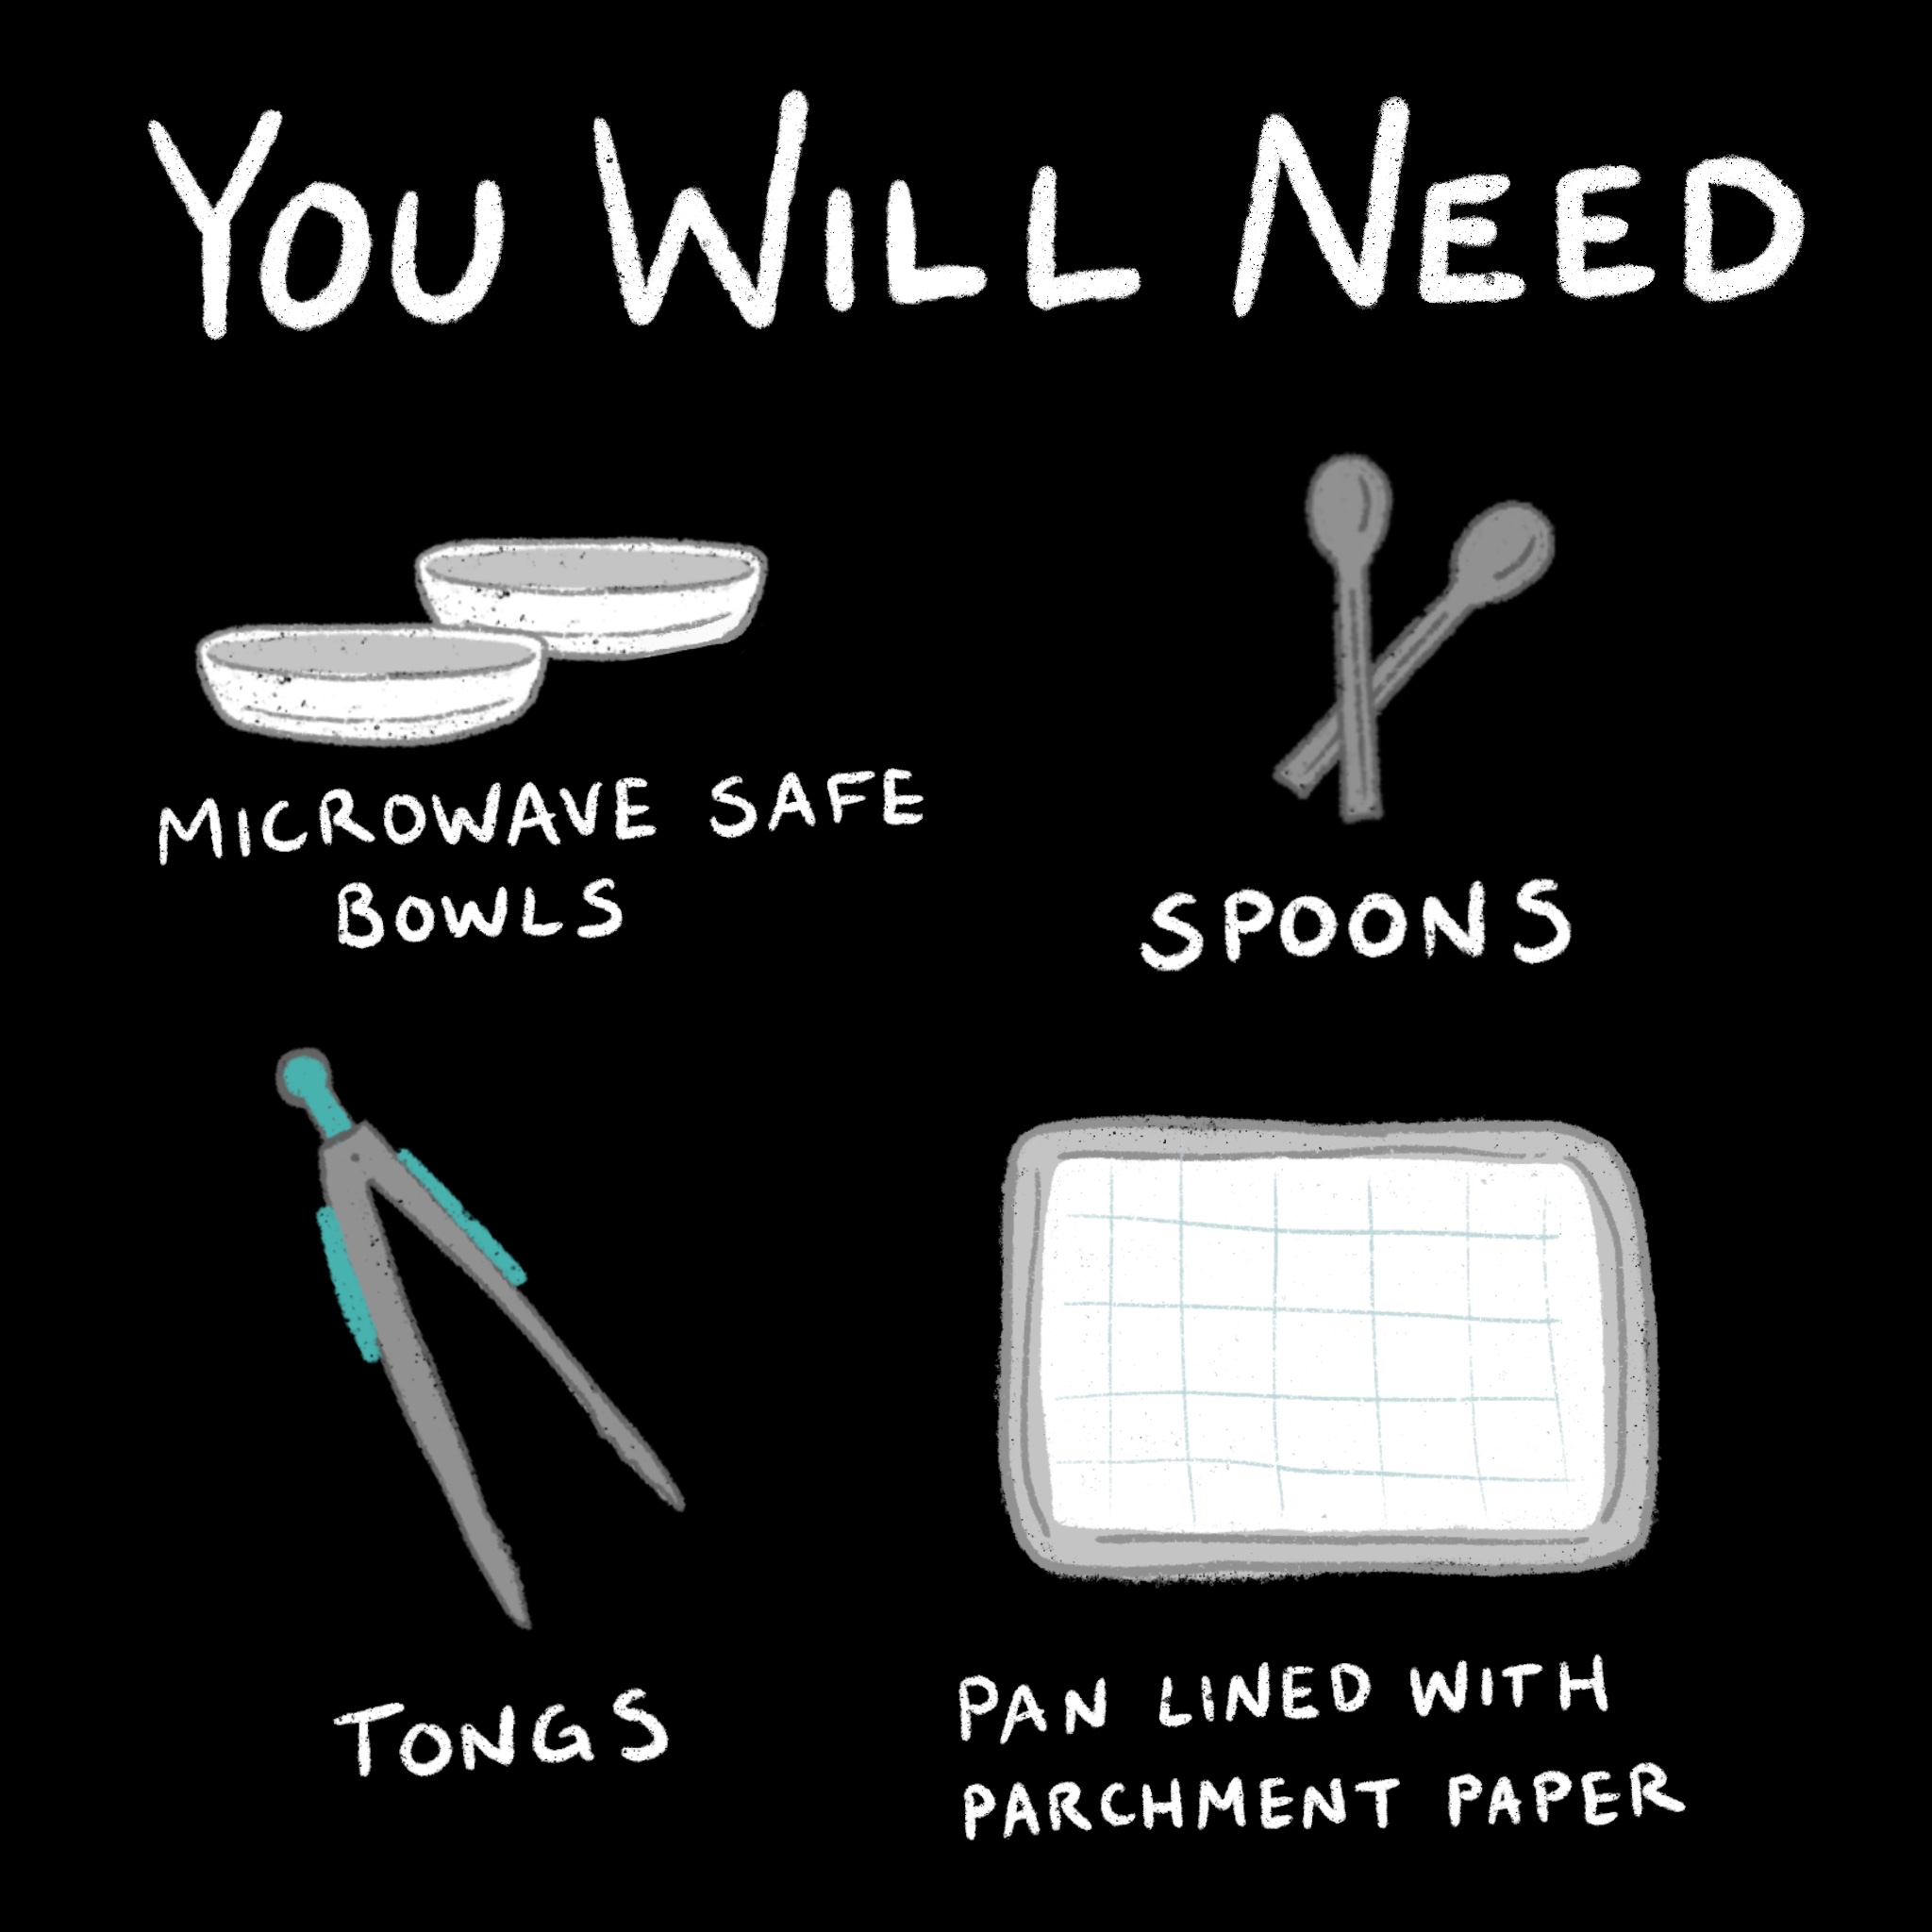  microwave safe bowls, spoons, tongs, pan lined with parchment paper